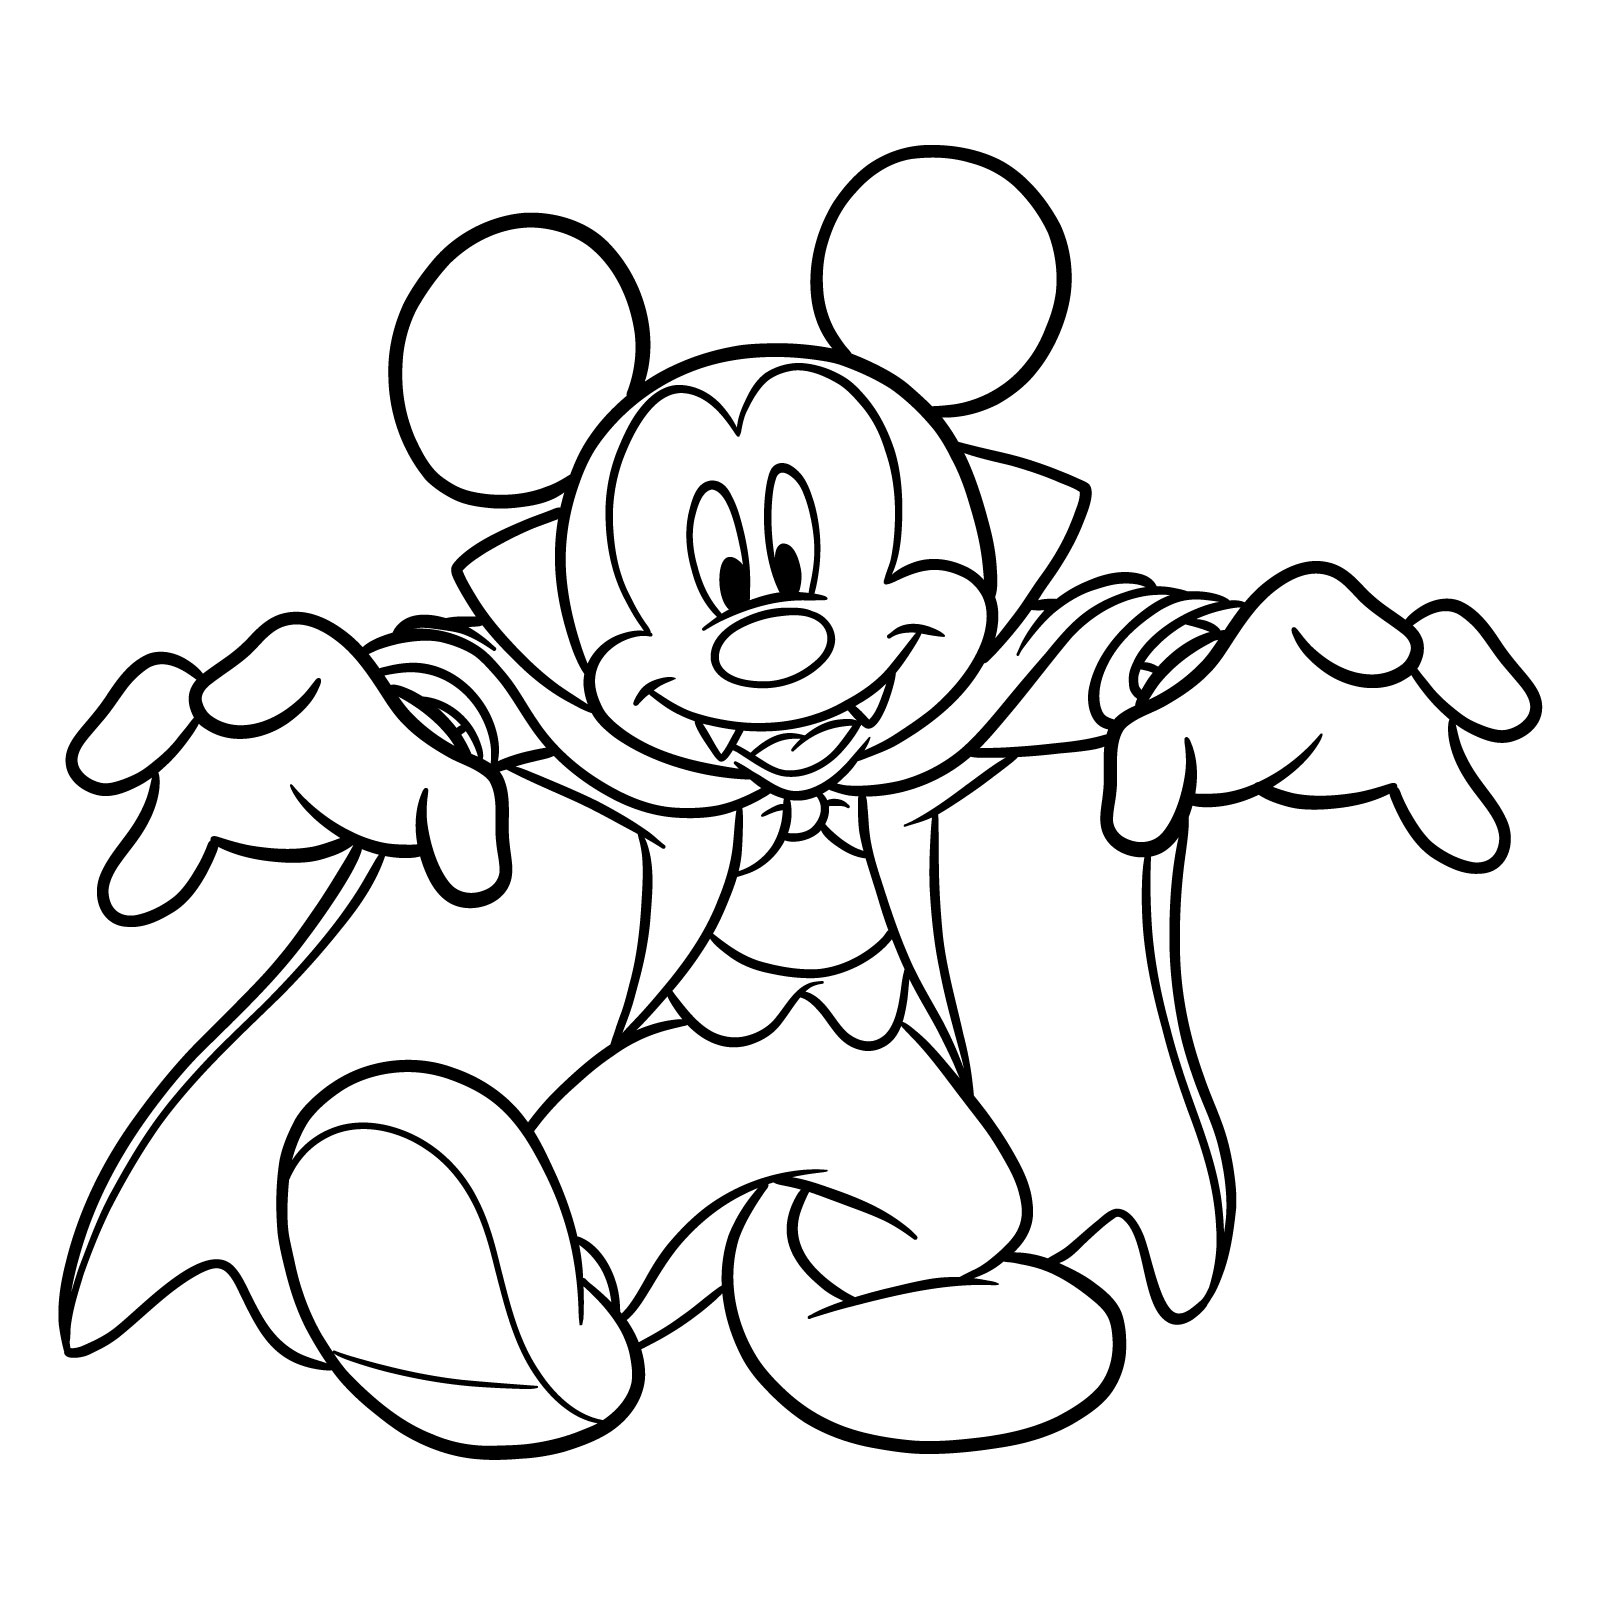 How to draw Dracula Mickey Mouse - final step